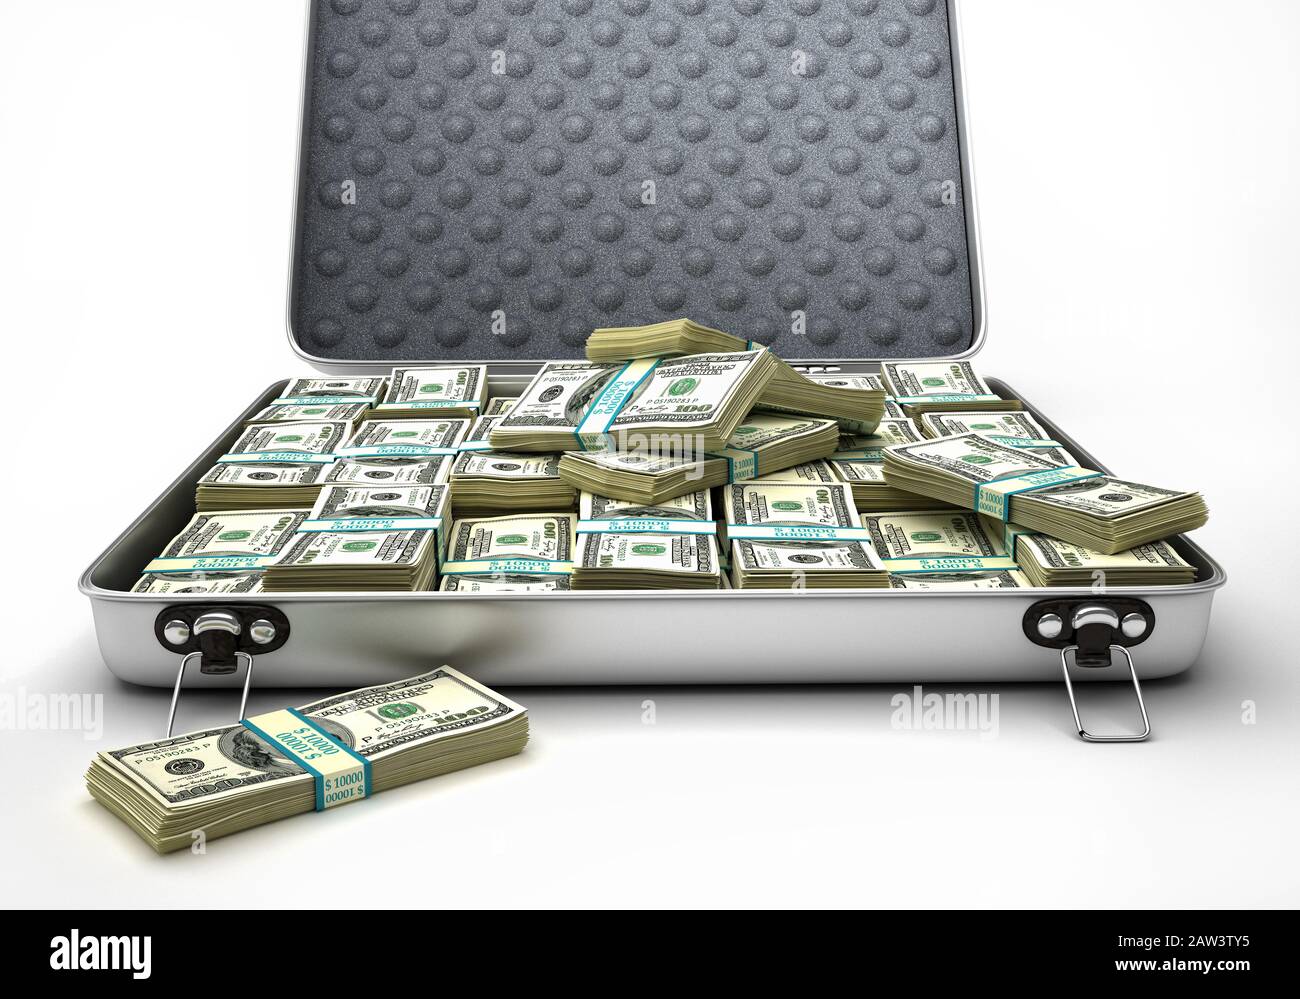 Briefcase open, full Wads of 100 $ banknotes. Frontal view. 3D illustration on white background. Stock Photo